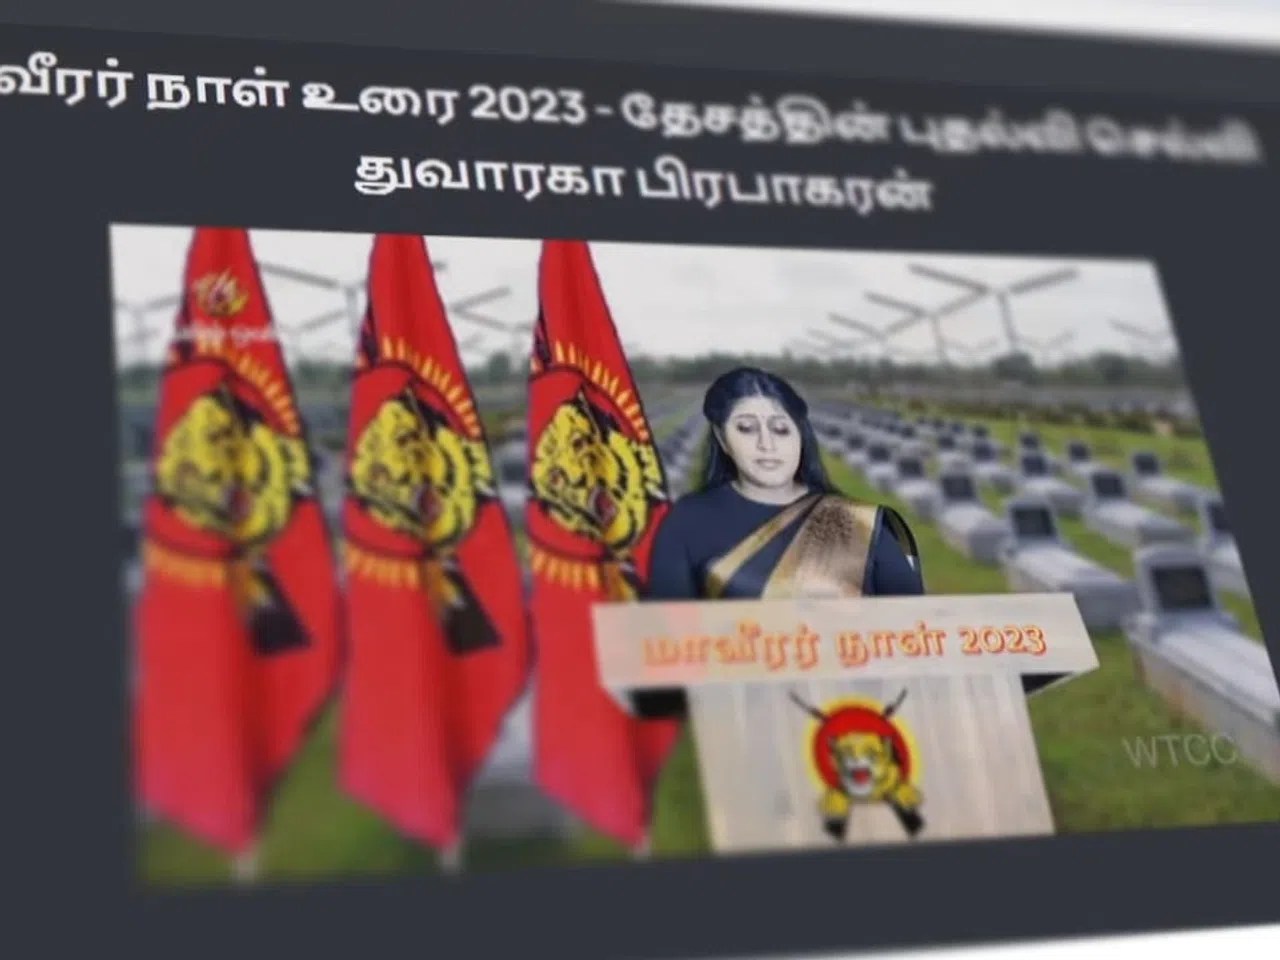 A screenshot from the controversial video that has been causing a stir in the Tamil community.